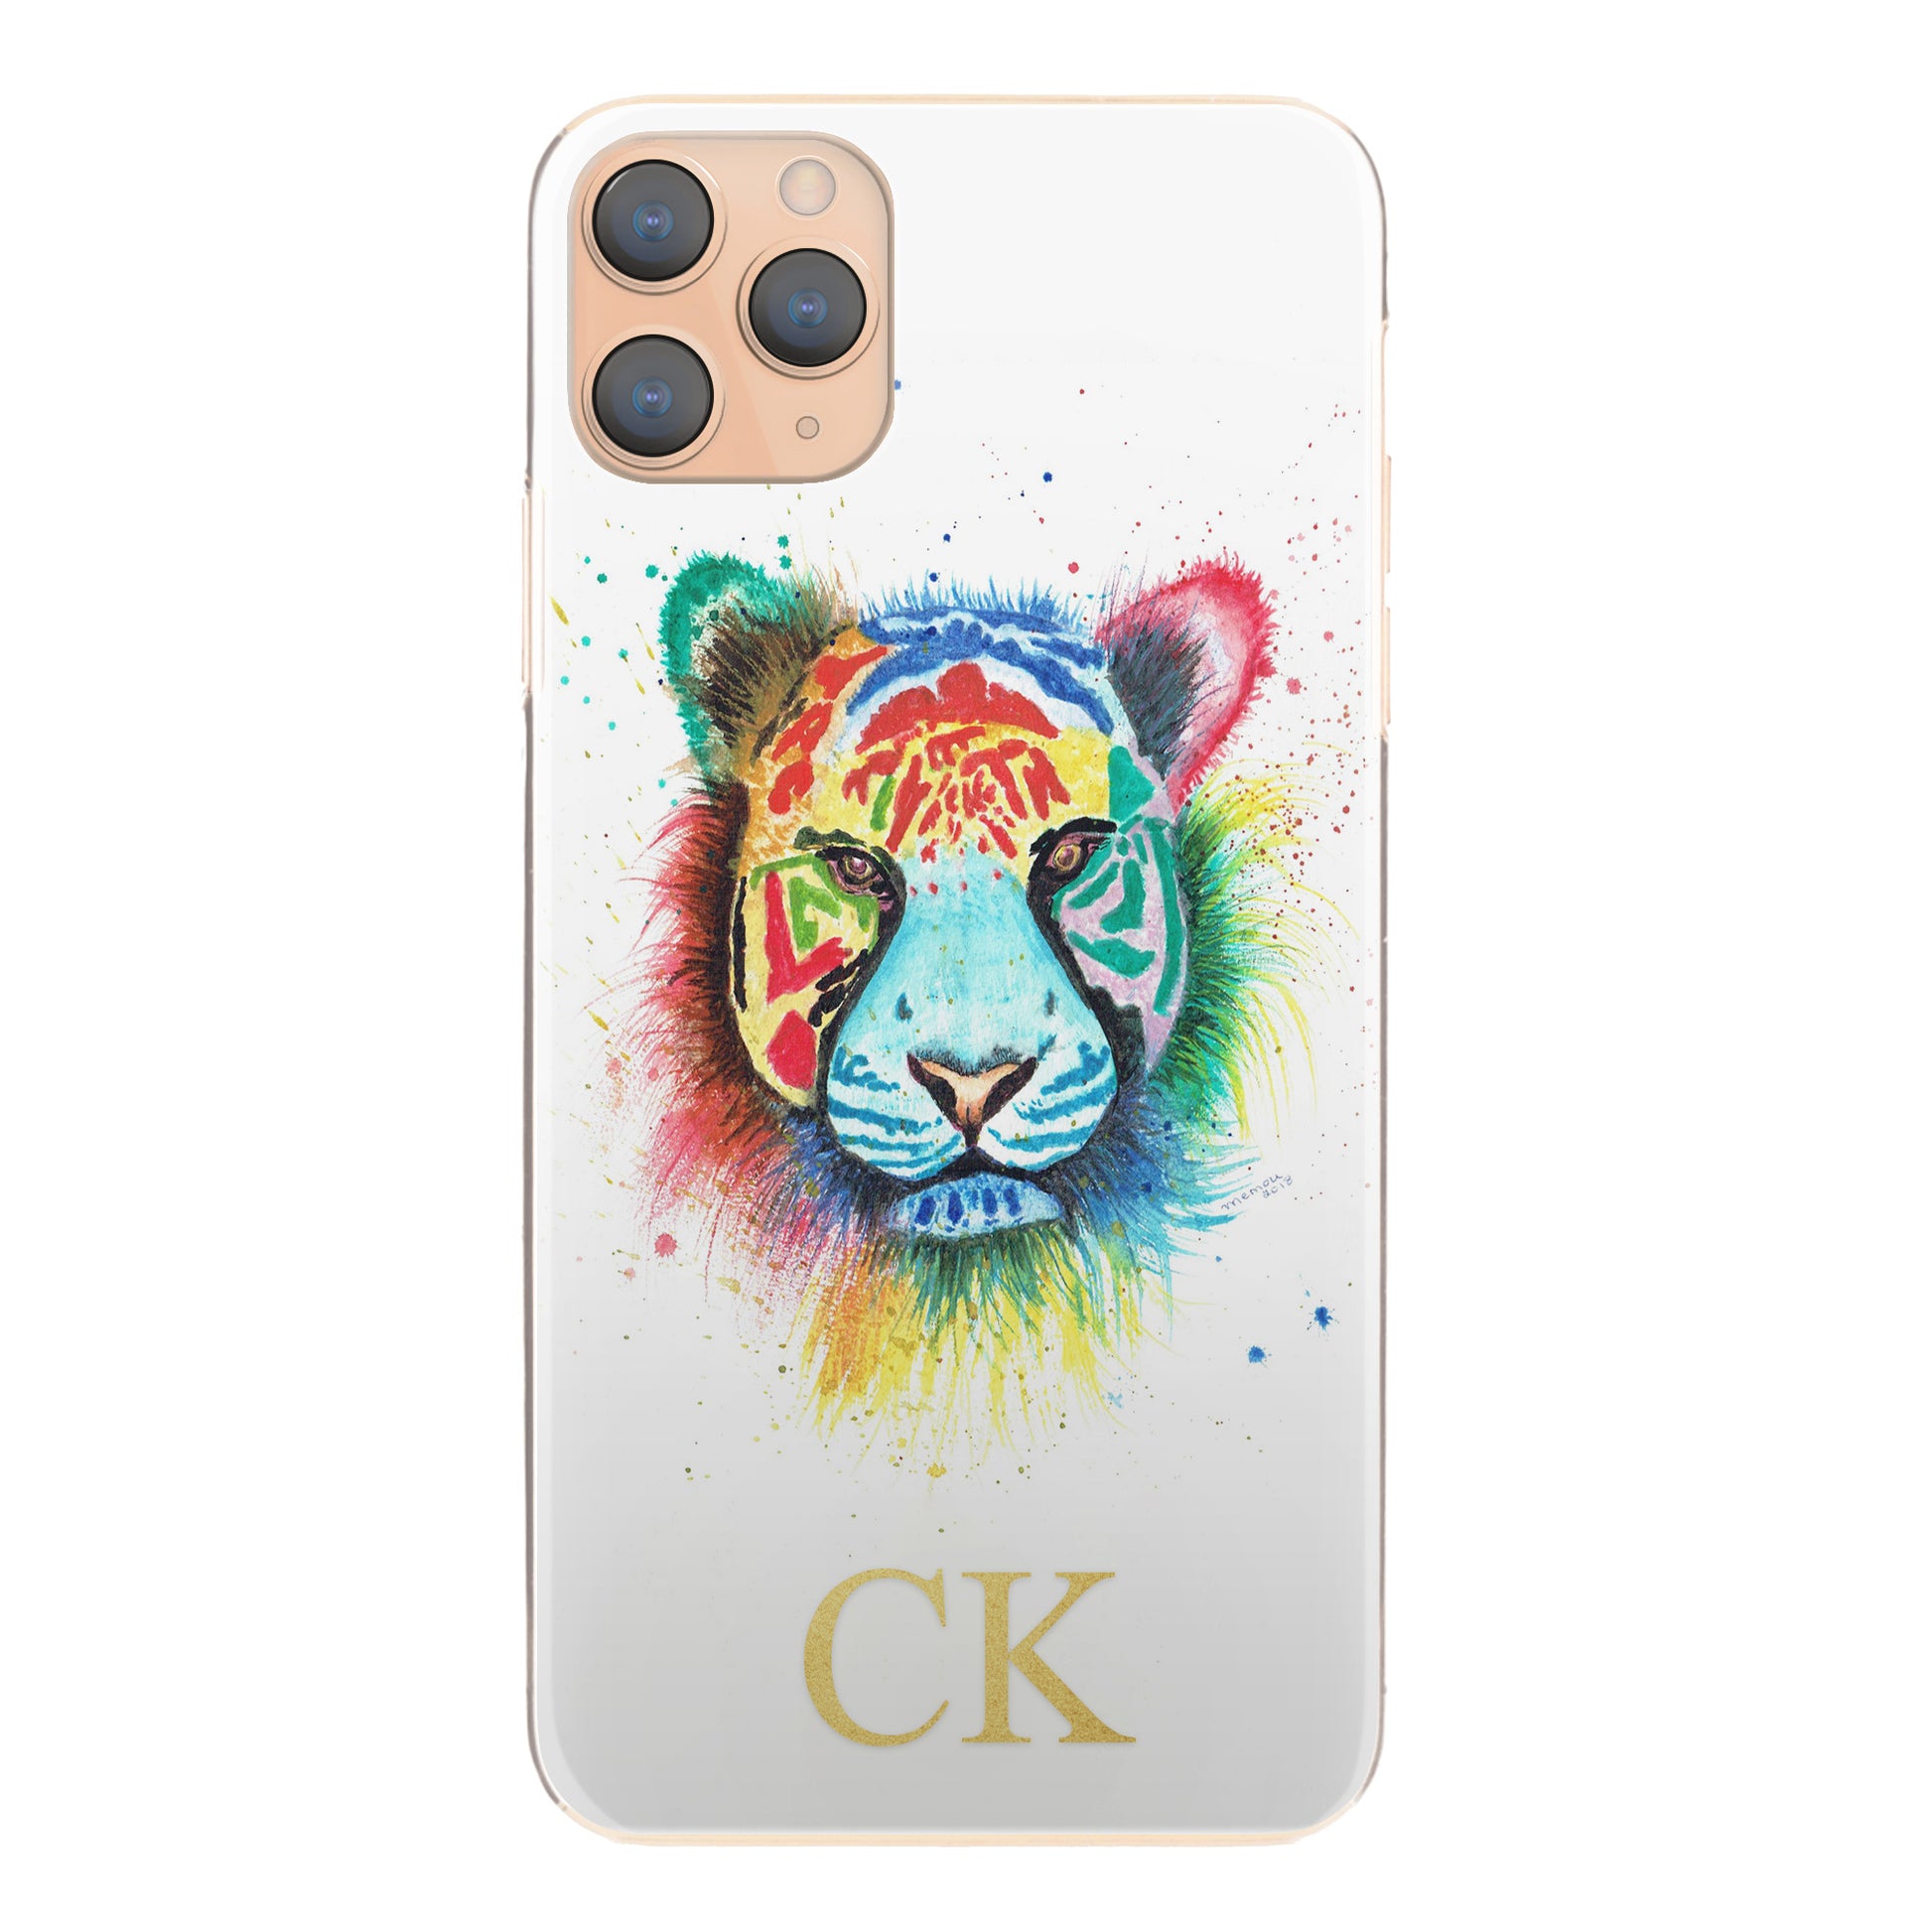 Personalised Motorola Phone Hard Case with Rainbow Tiger and Gold Initials